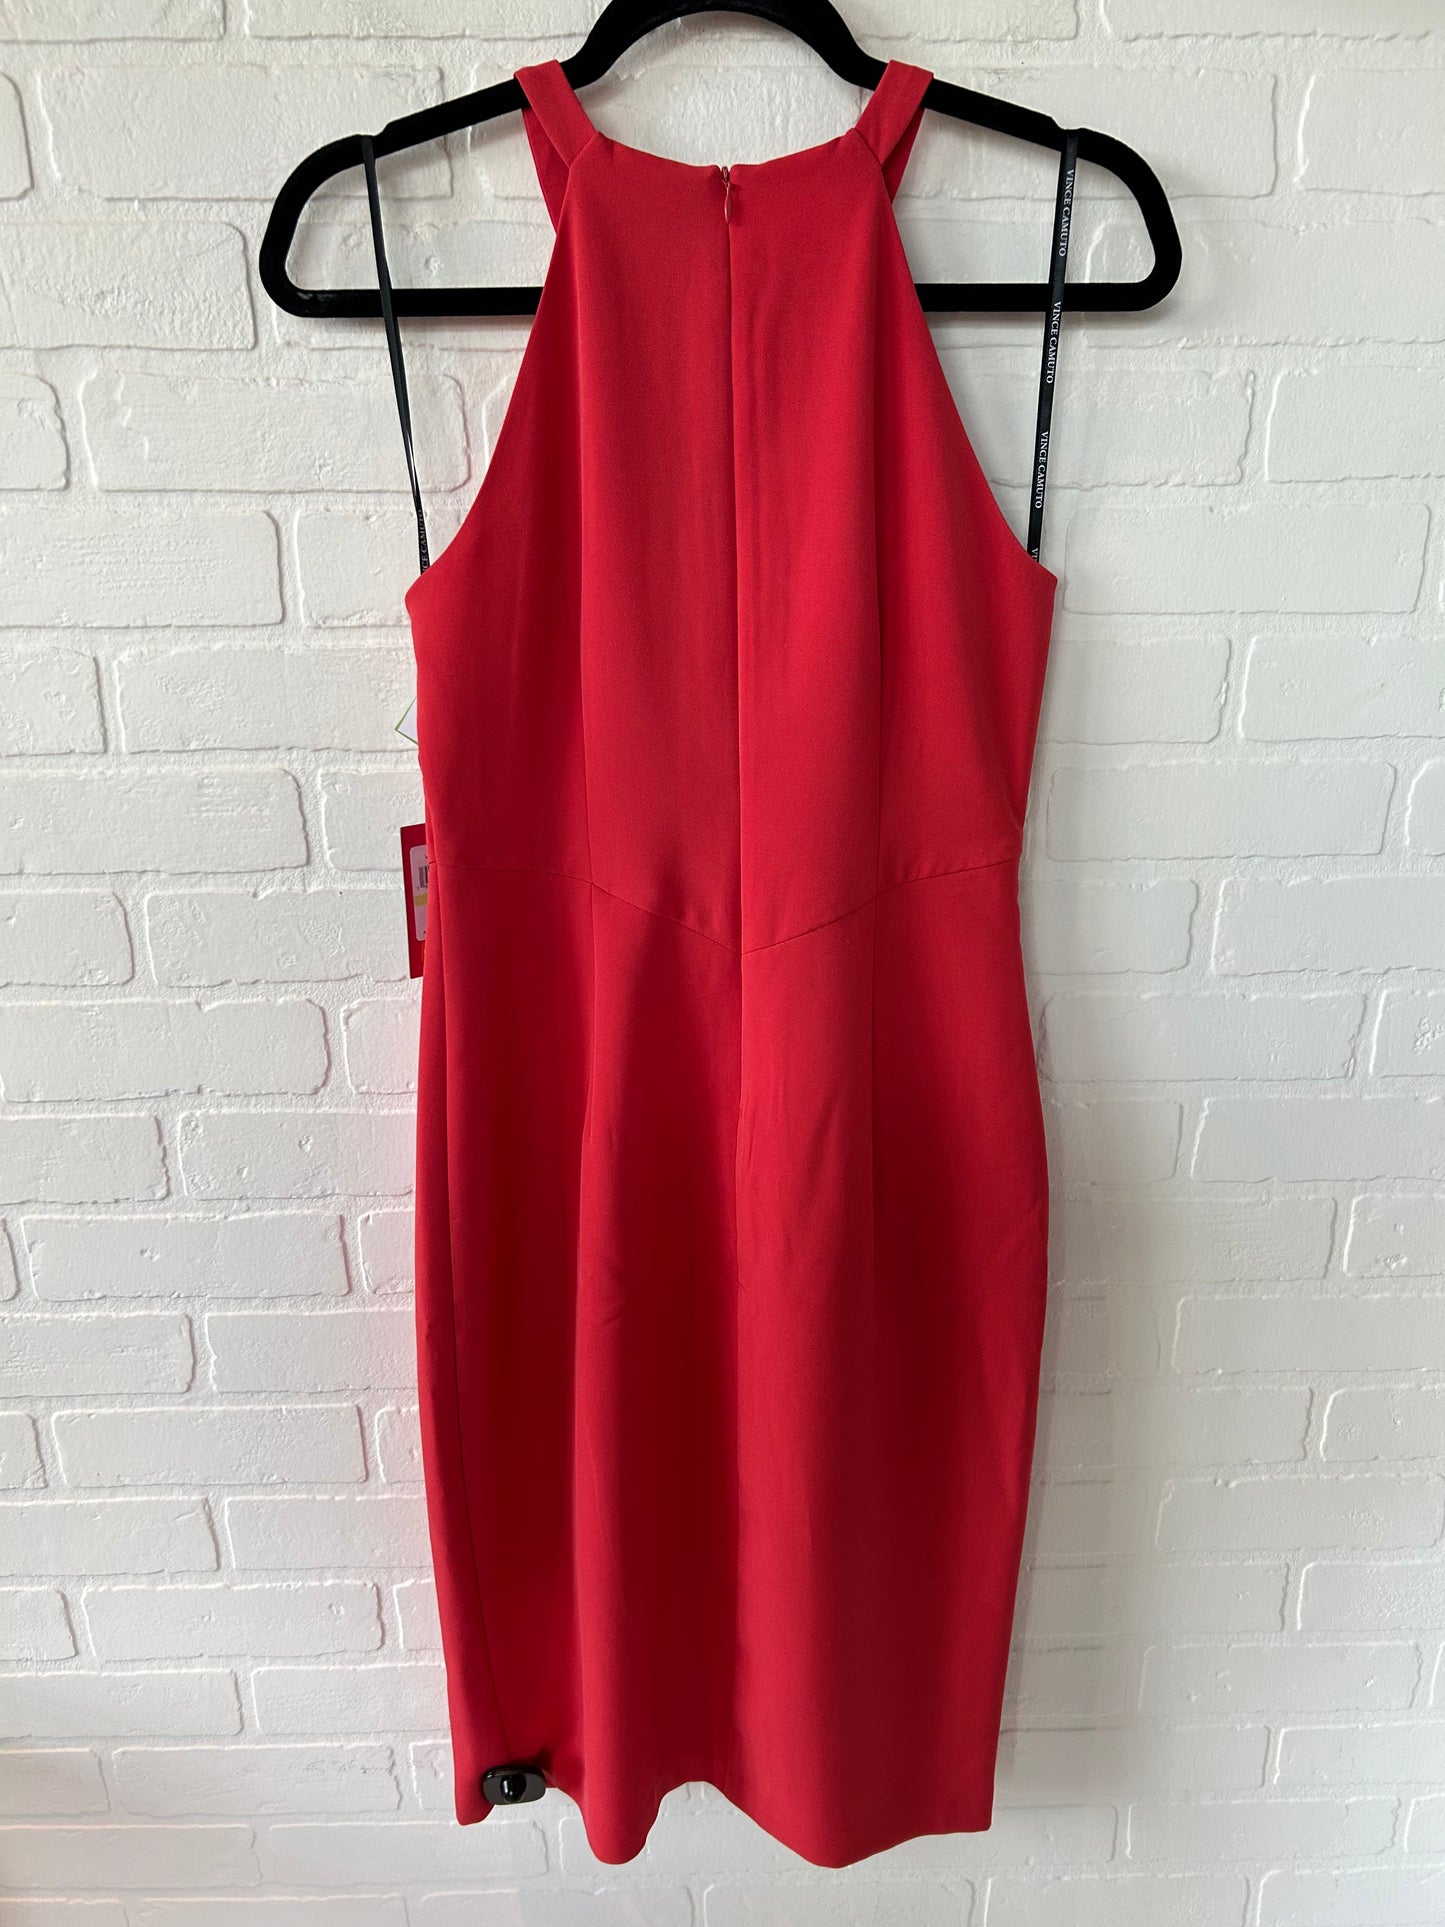 Dress Party Midi By Vince Camuto  Size: S